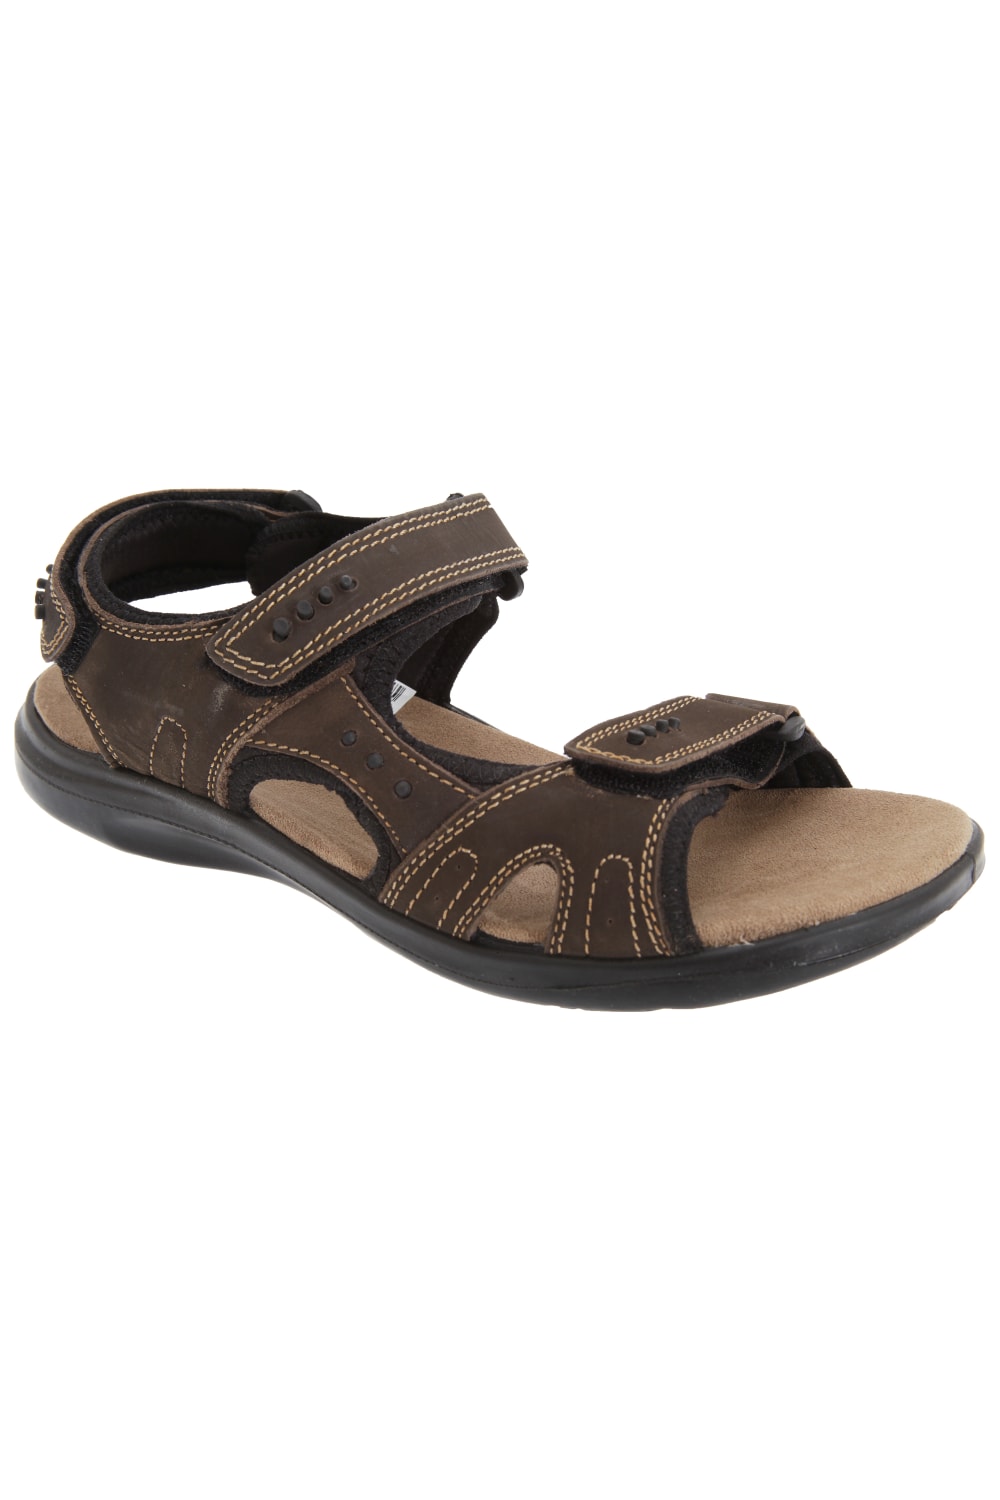 Mens 3 Touch Fastening Padded Sports Sandals (Brown)